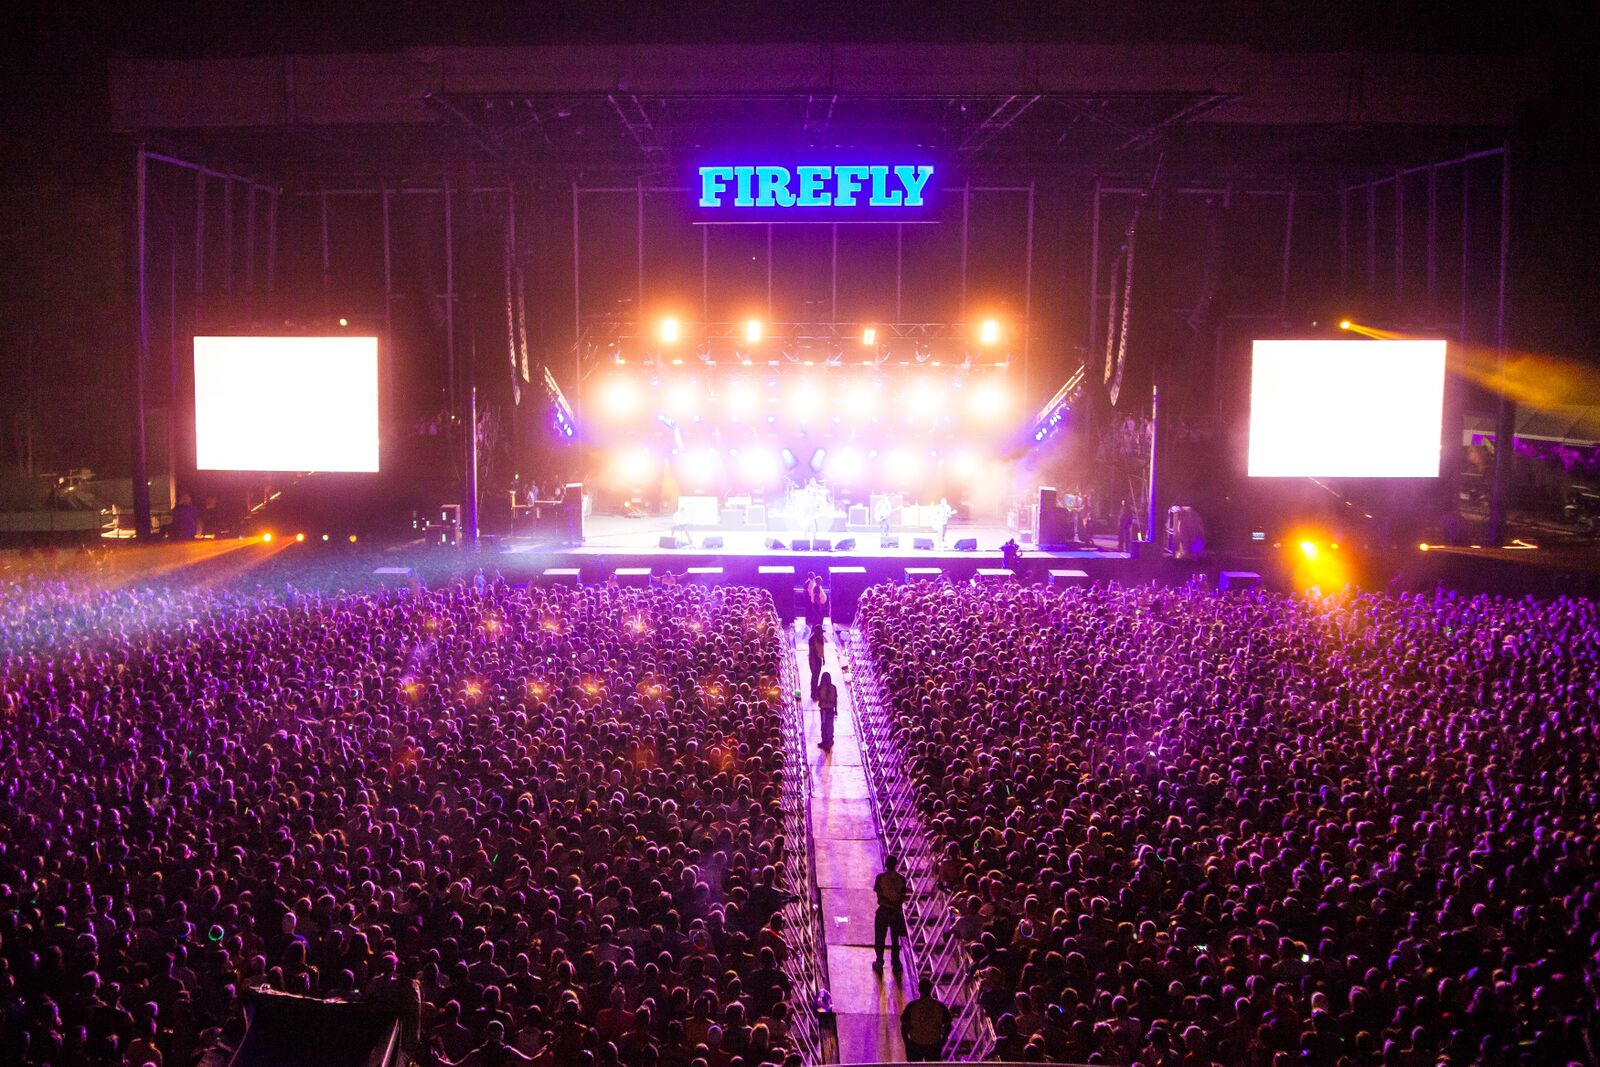 Firefly 2015: What to know before you go and how to enjoy it from home